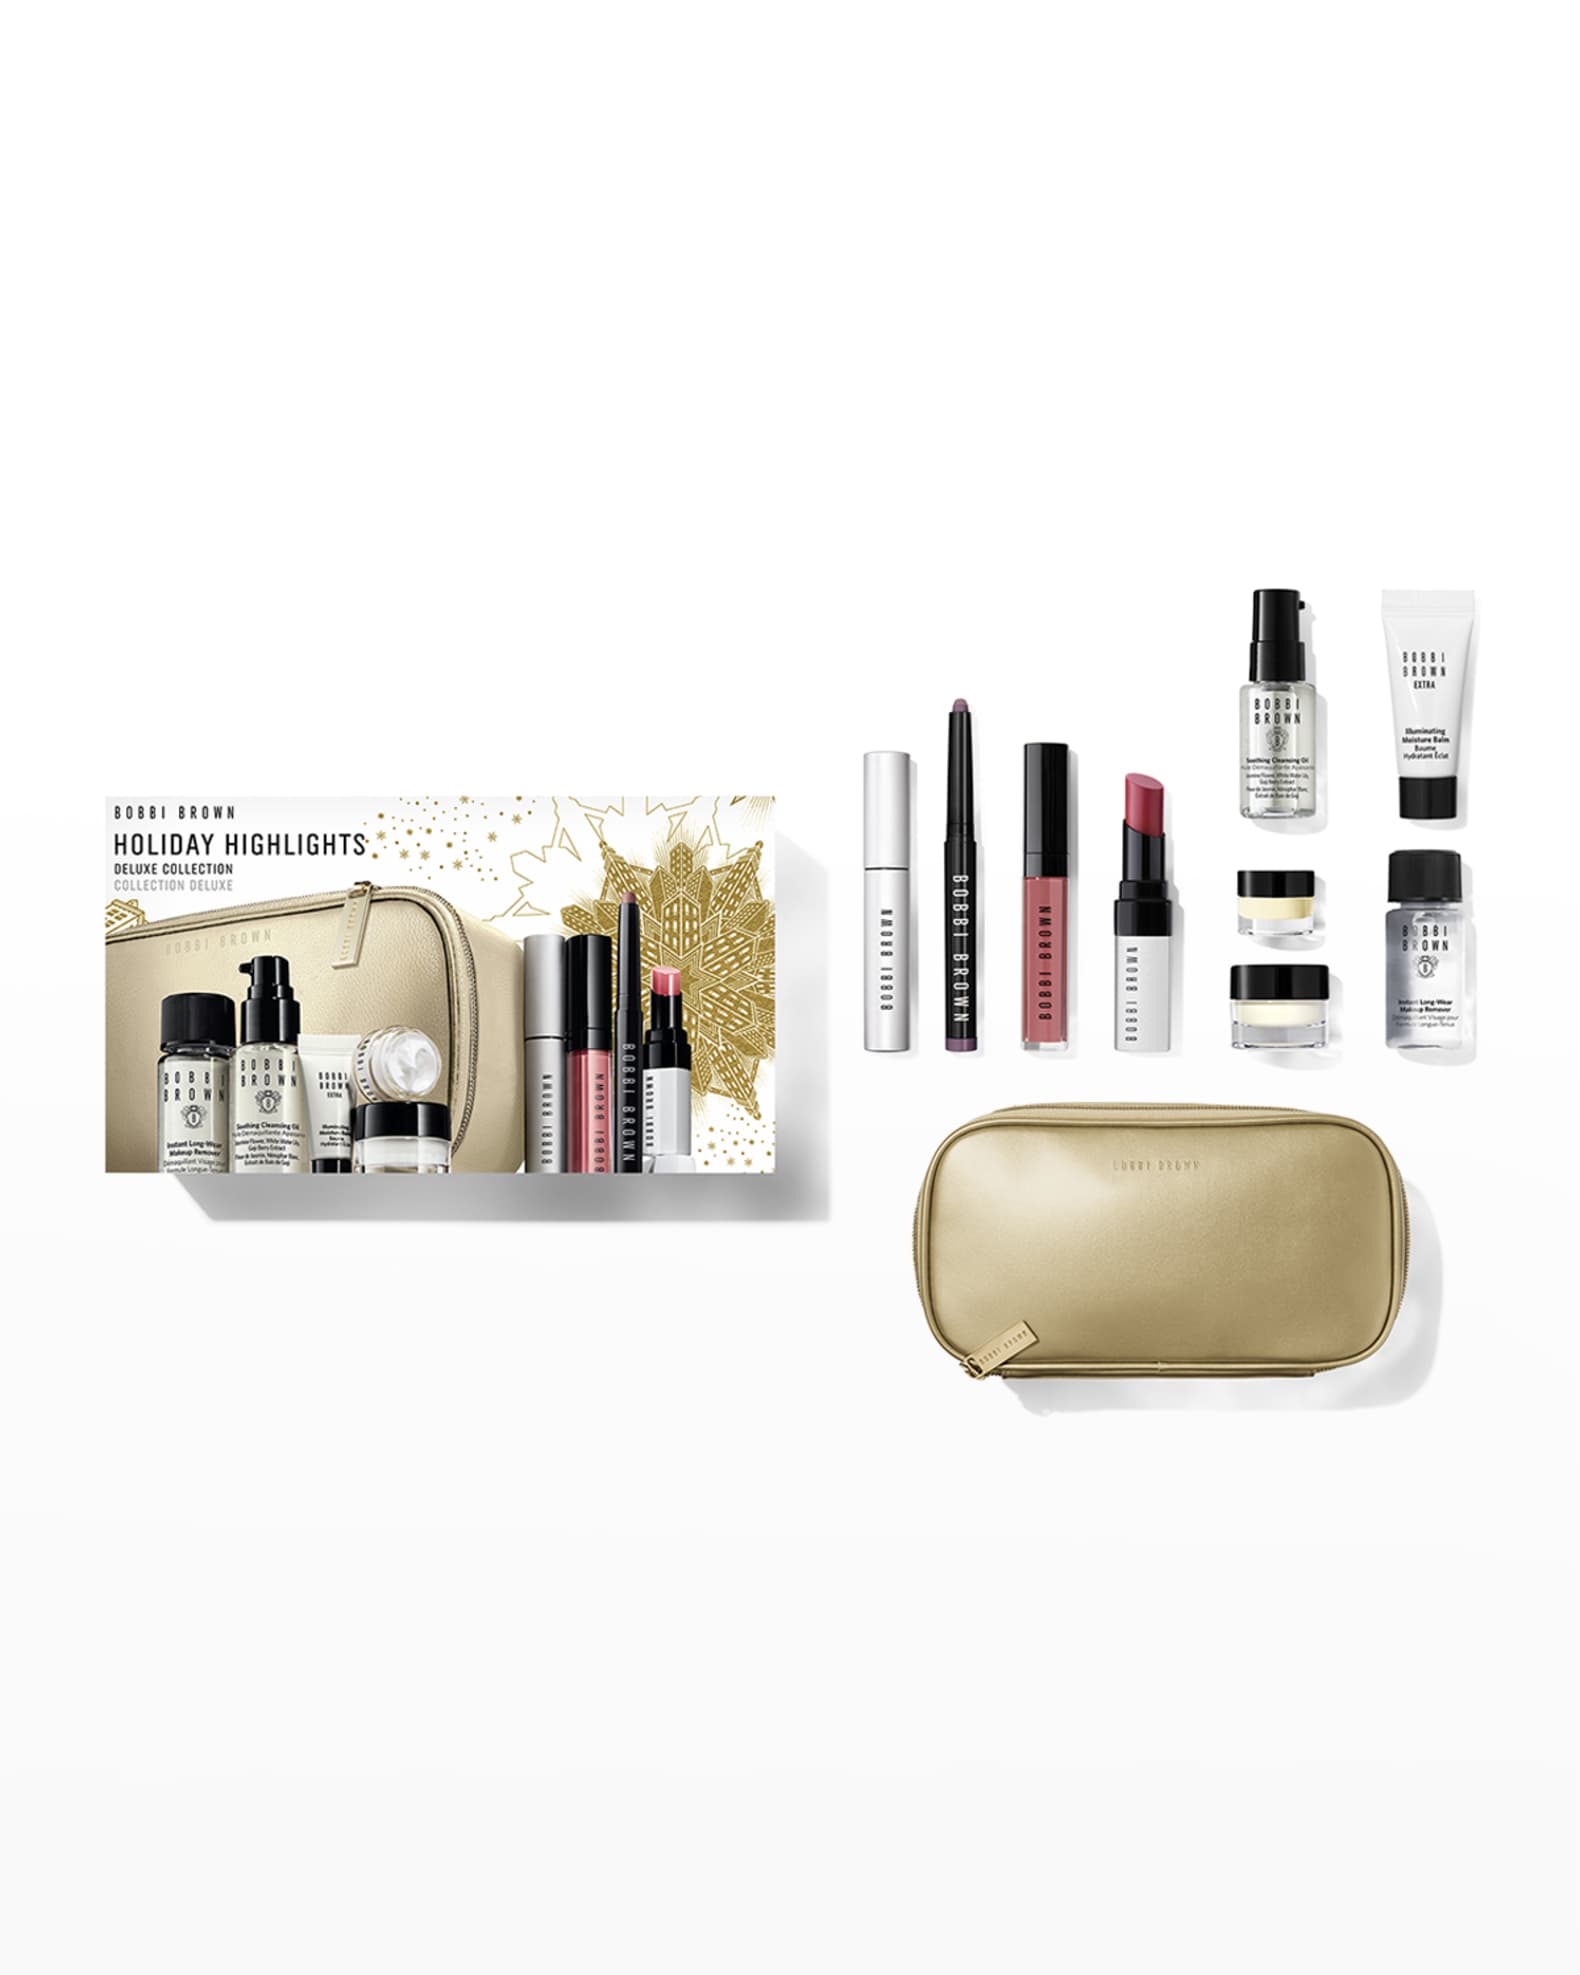 Holiday Highlights Deluxe Collection ($252 Value)